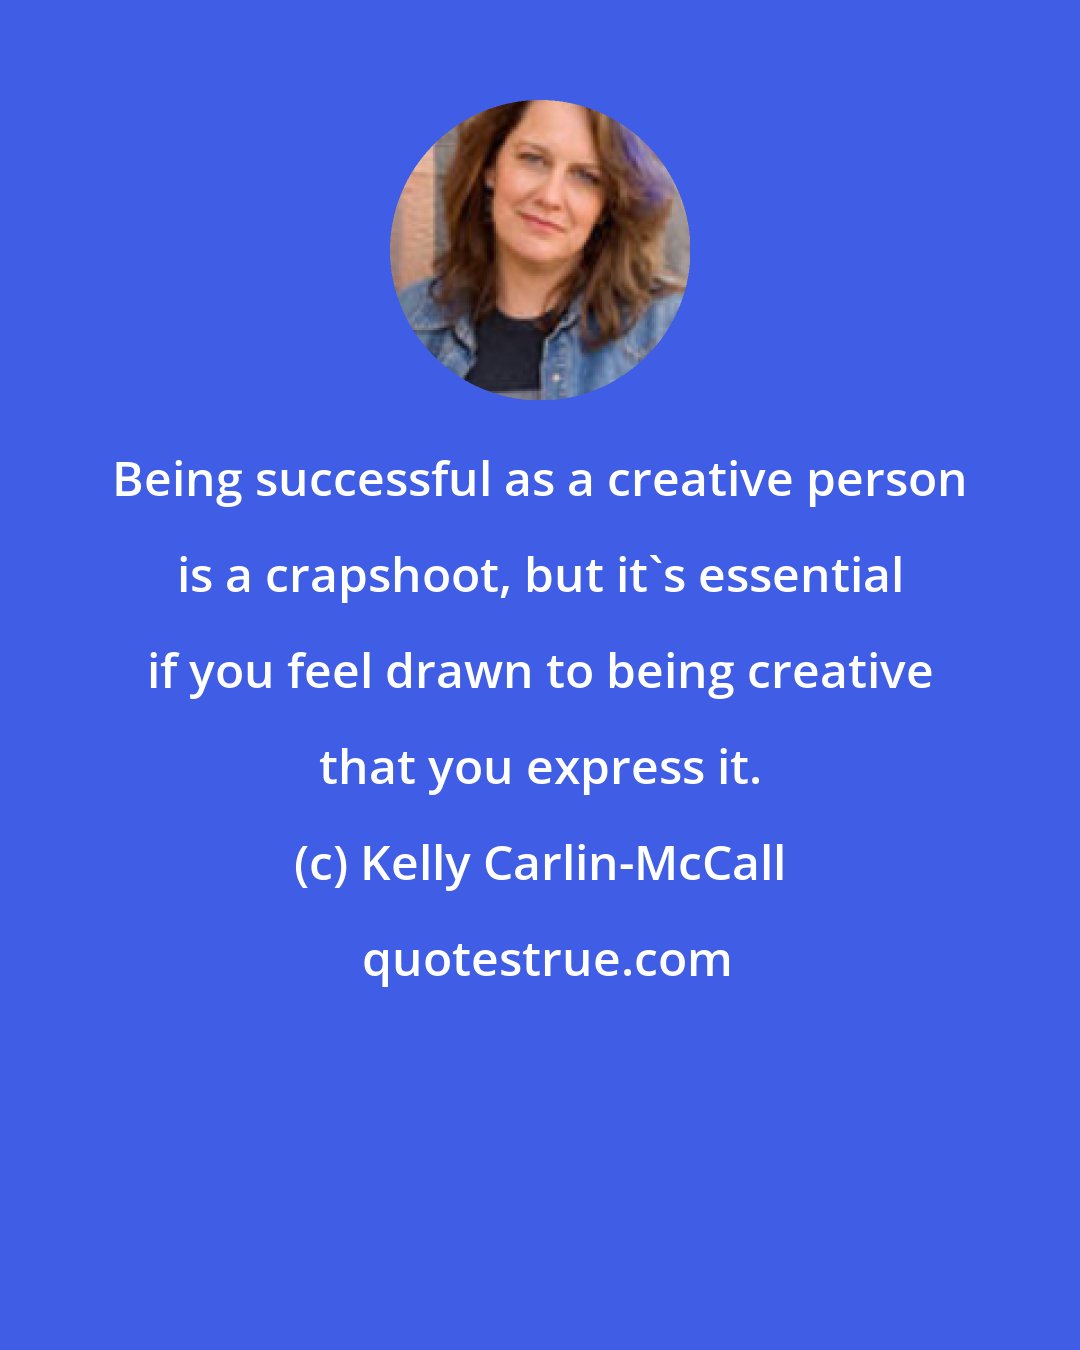 Kelly Carlin-McCall: Being successful as a creative person is a crapshoot, but it's essential if you feel drawn to being creative that you express it.